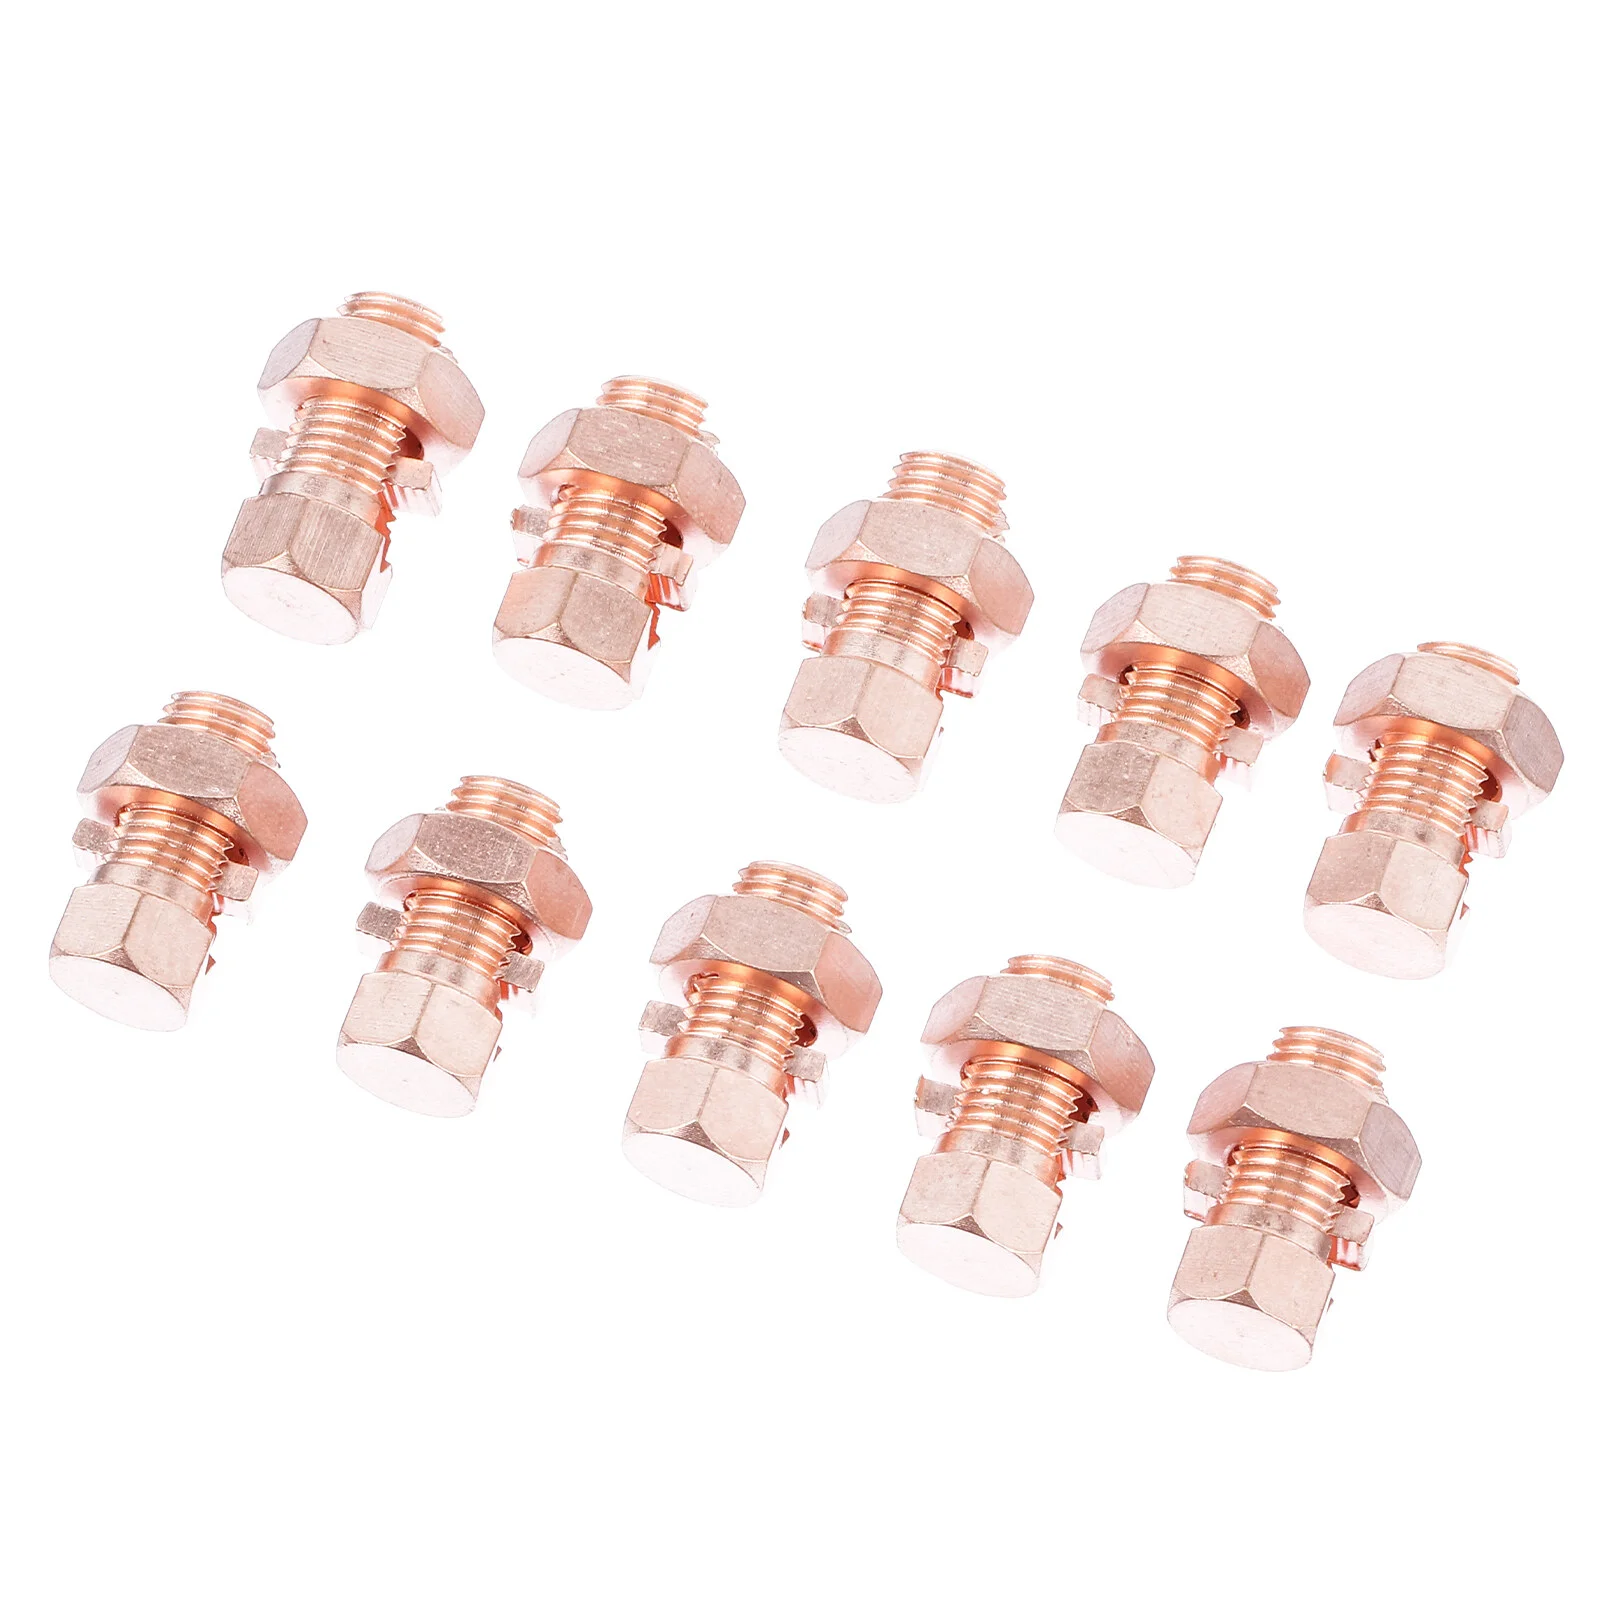 

10 Pcs Bolt Clamp Copper Split Connector Antenna Joint Grounding Strength Electric Wire Bonding Satellite